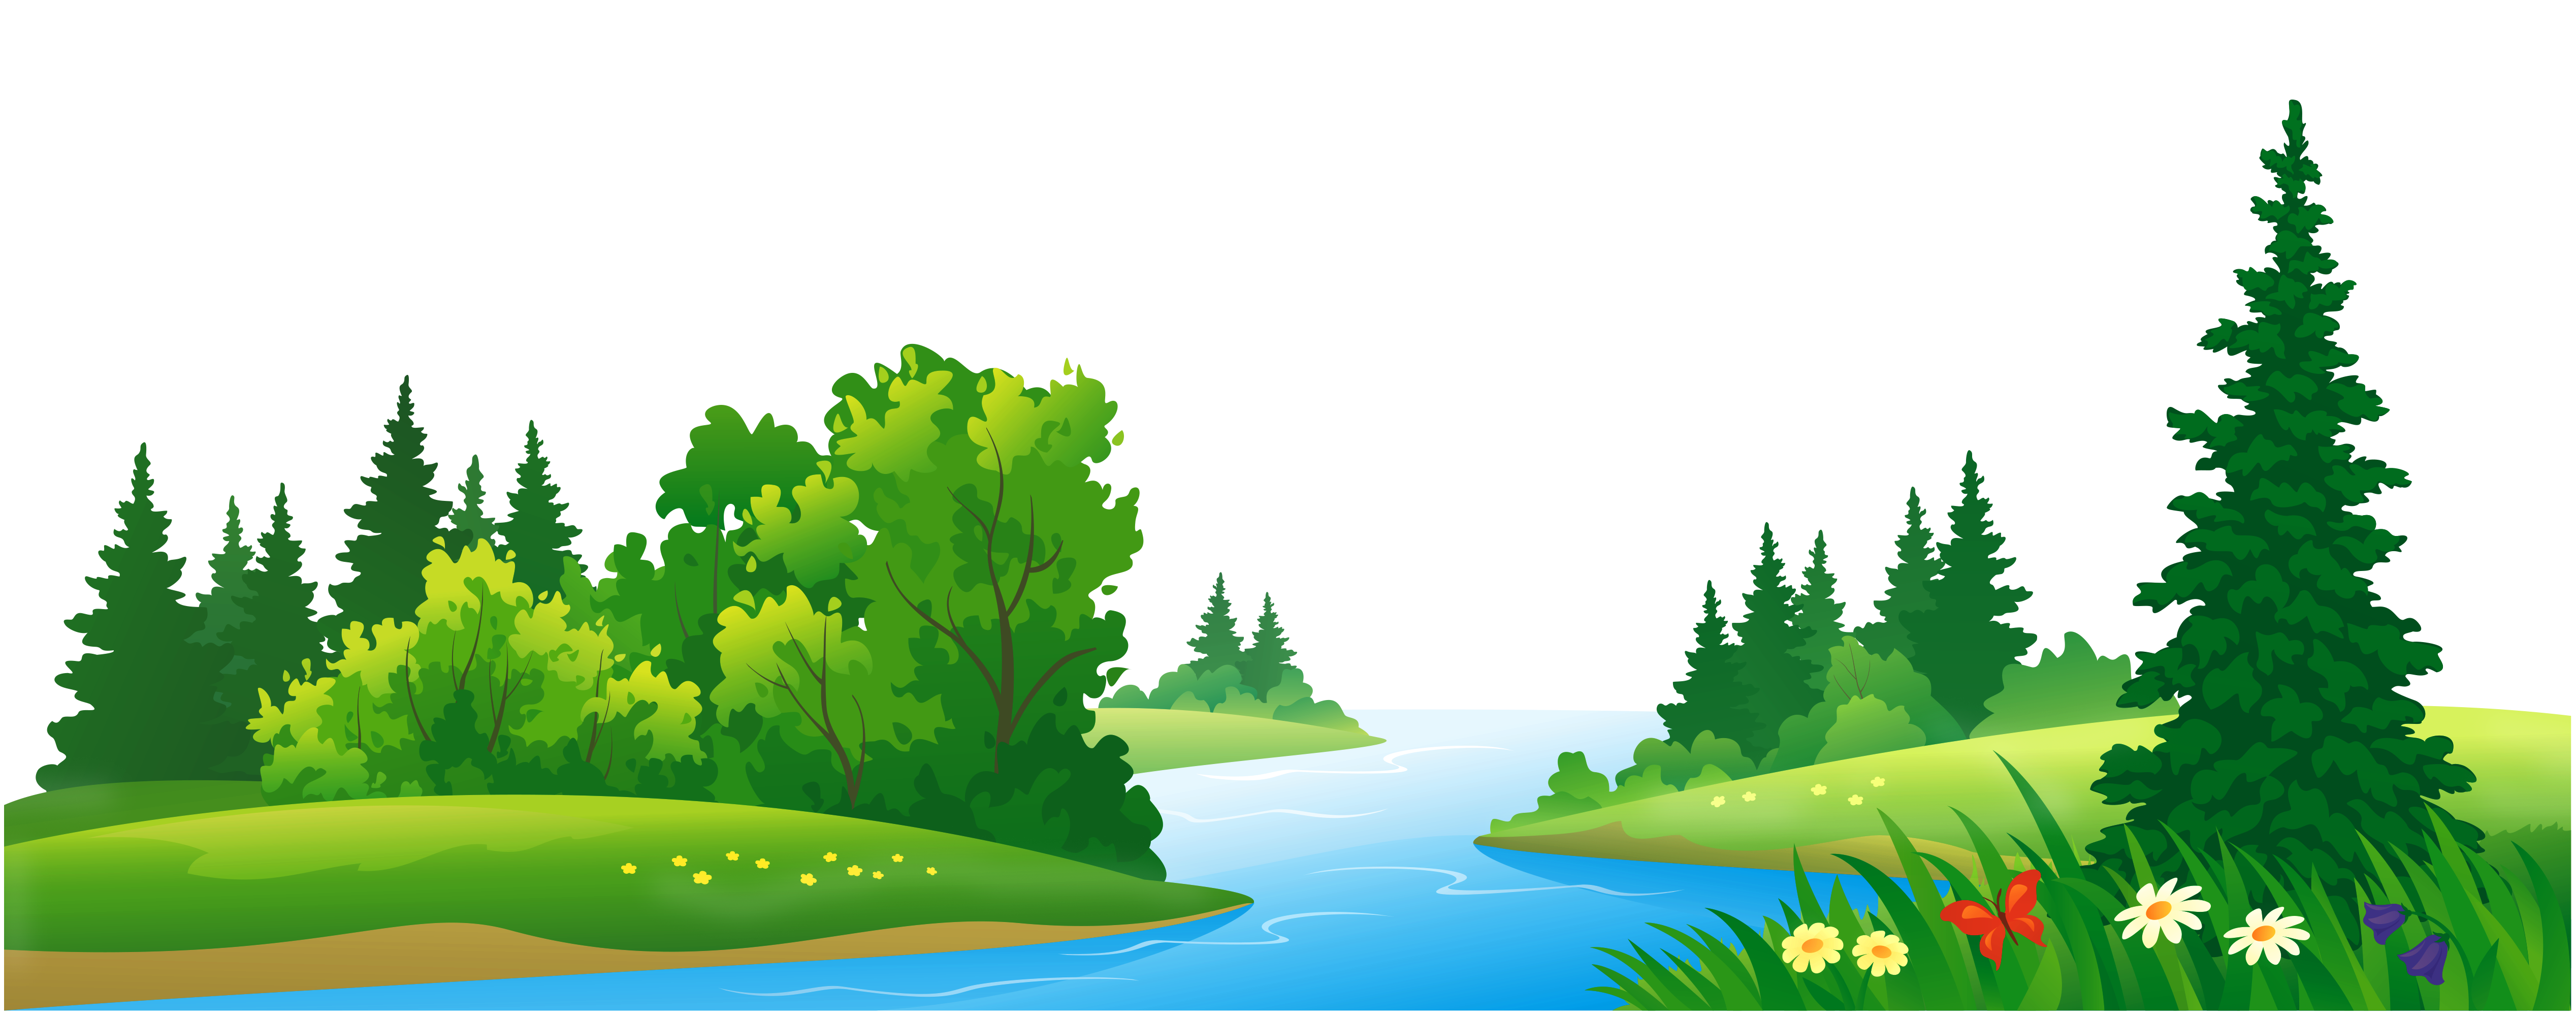 Forest Clip Art Grass Lake And Trees Transparent Png Clipart Png Download 5072 2000 Free Transparent Lake Png Download Clip Art Library